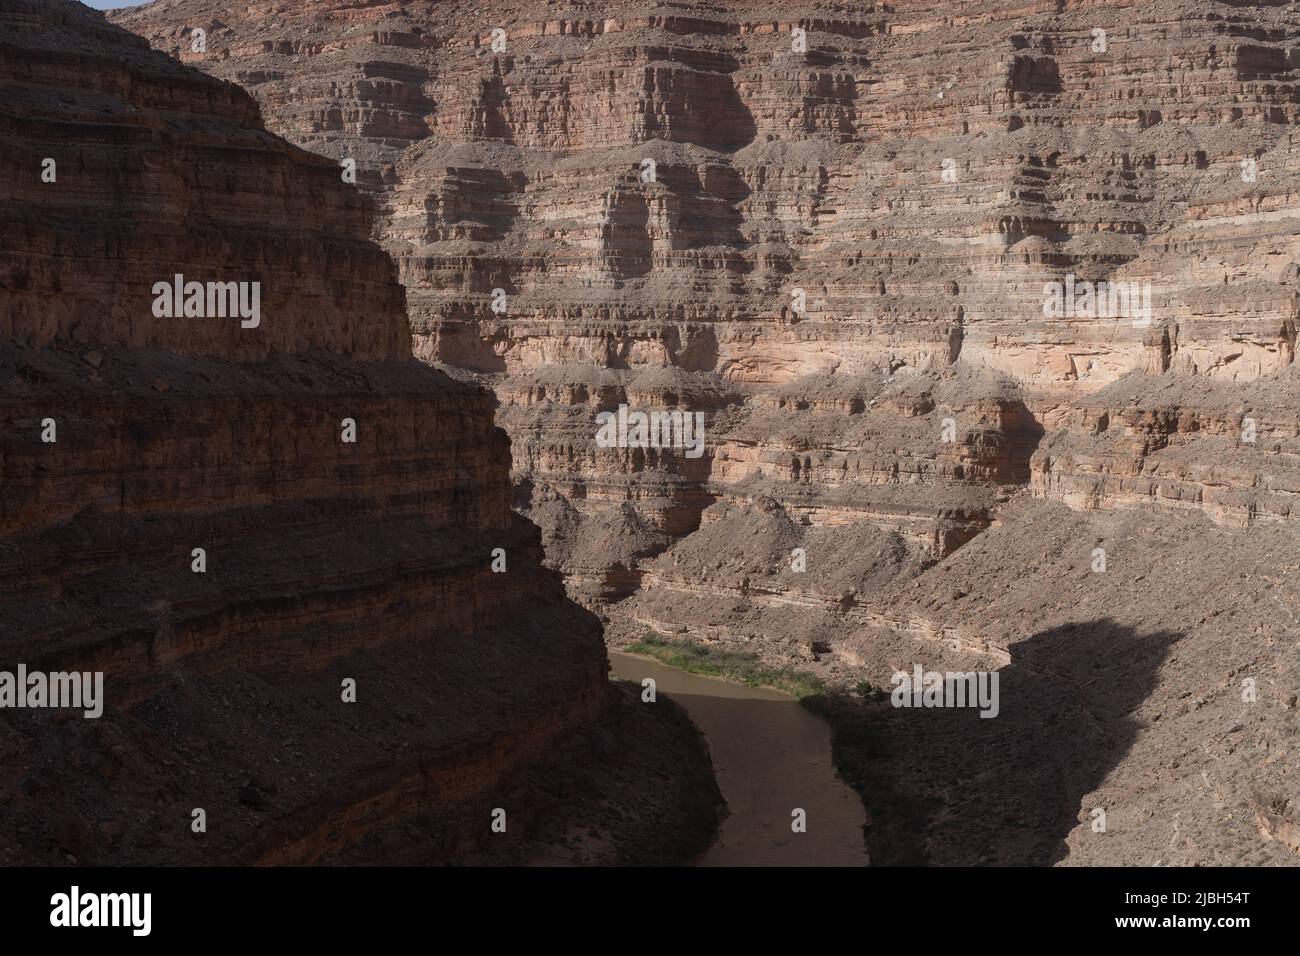 The natural beauty of rock formations and steep canyons along the San Juan River in Four Corners area in southern Utah. Stock Photo